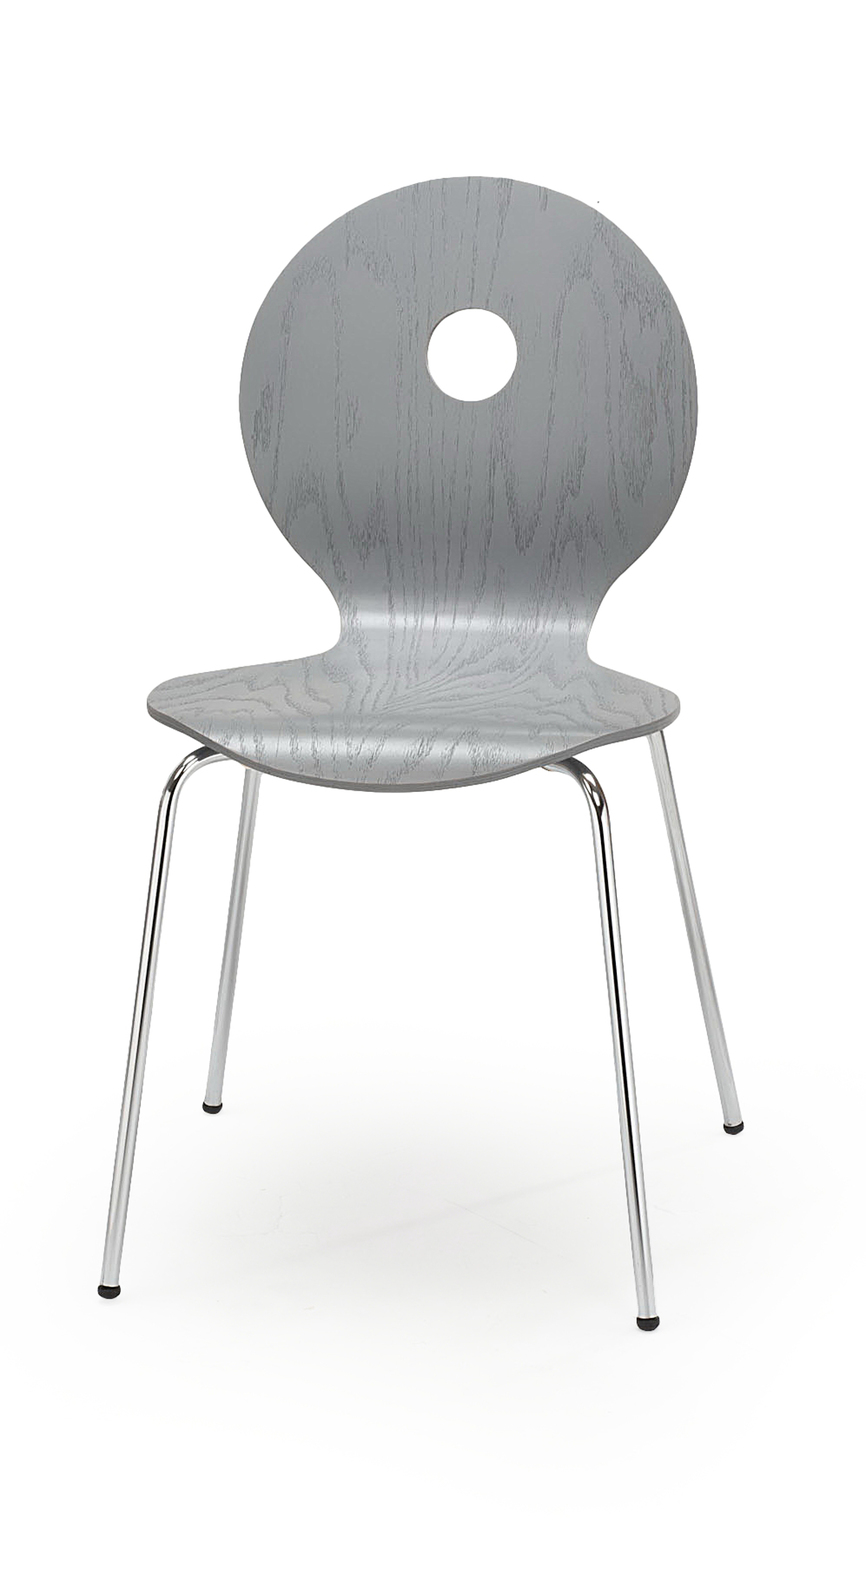 K233 chair, color: grey